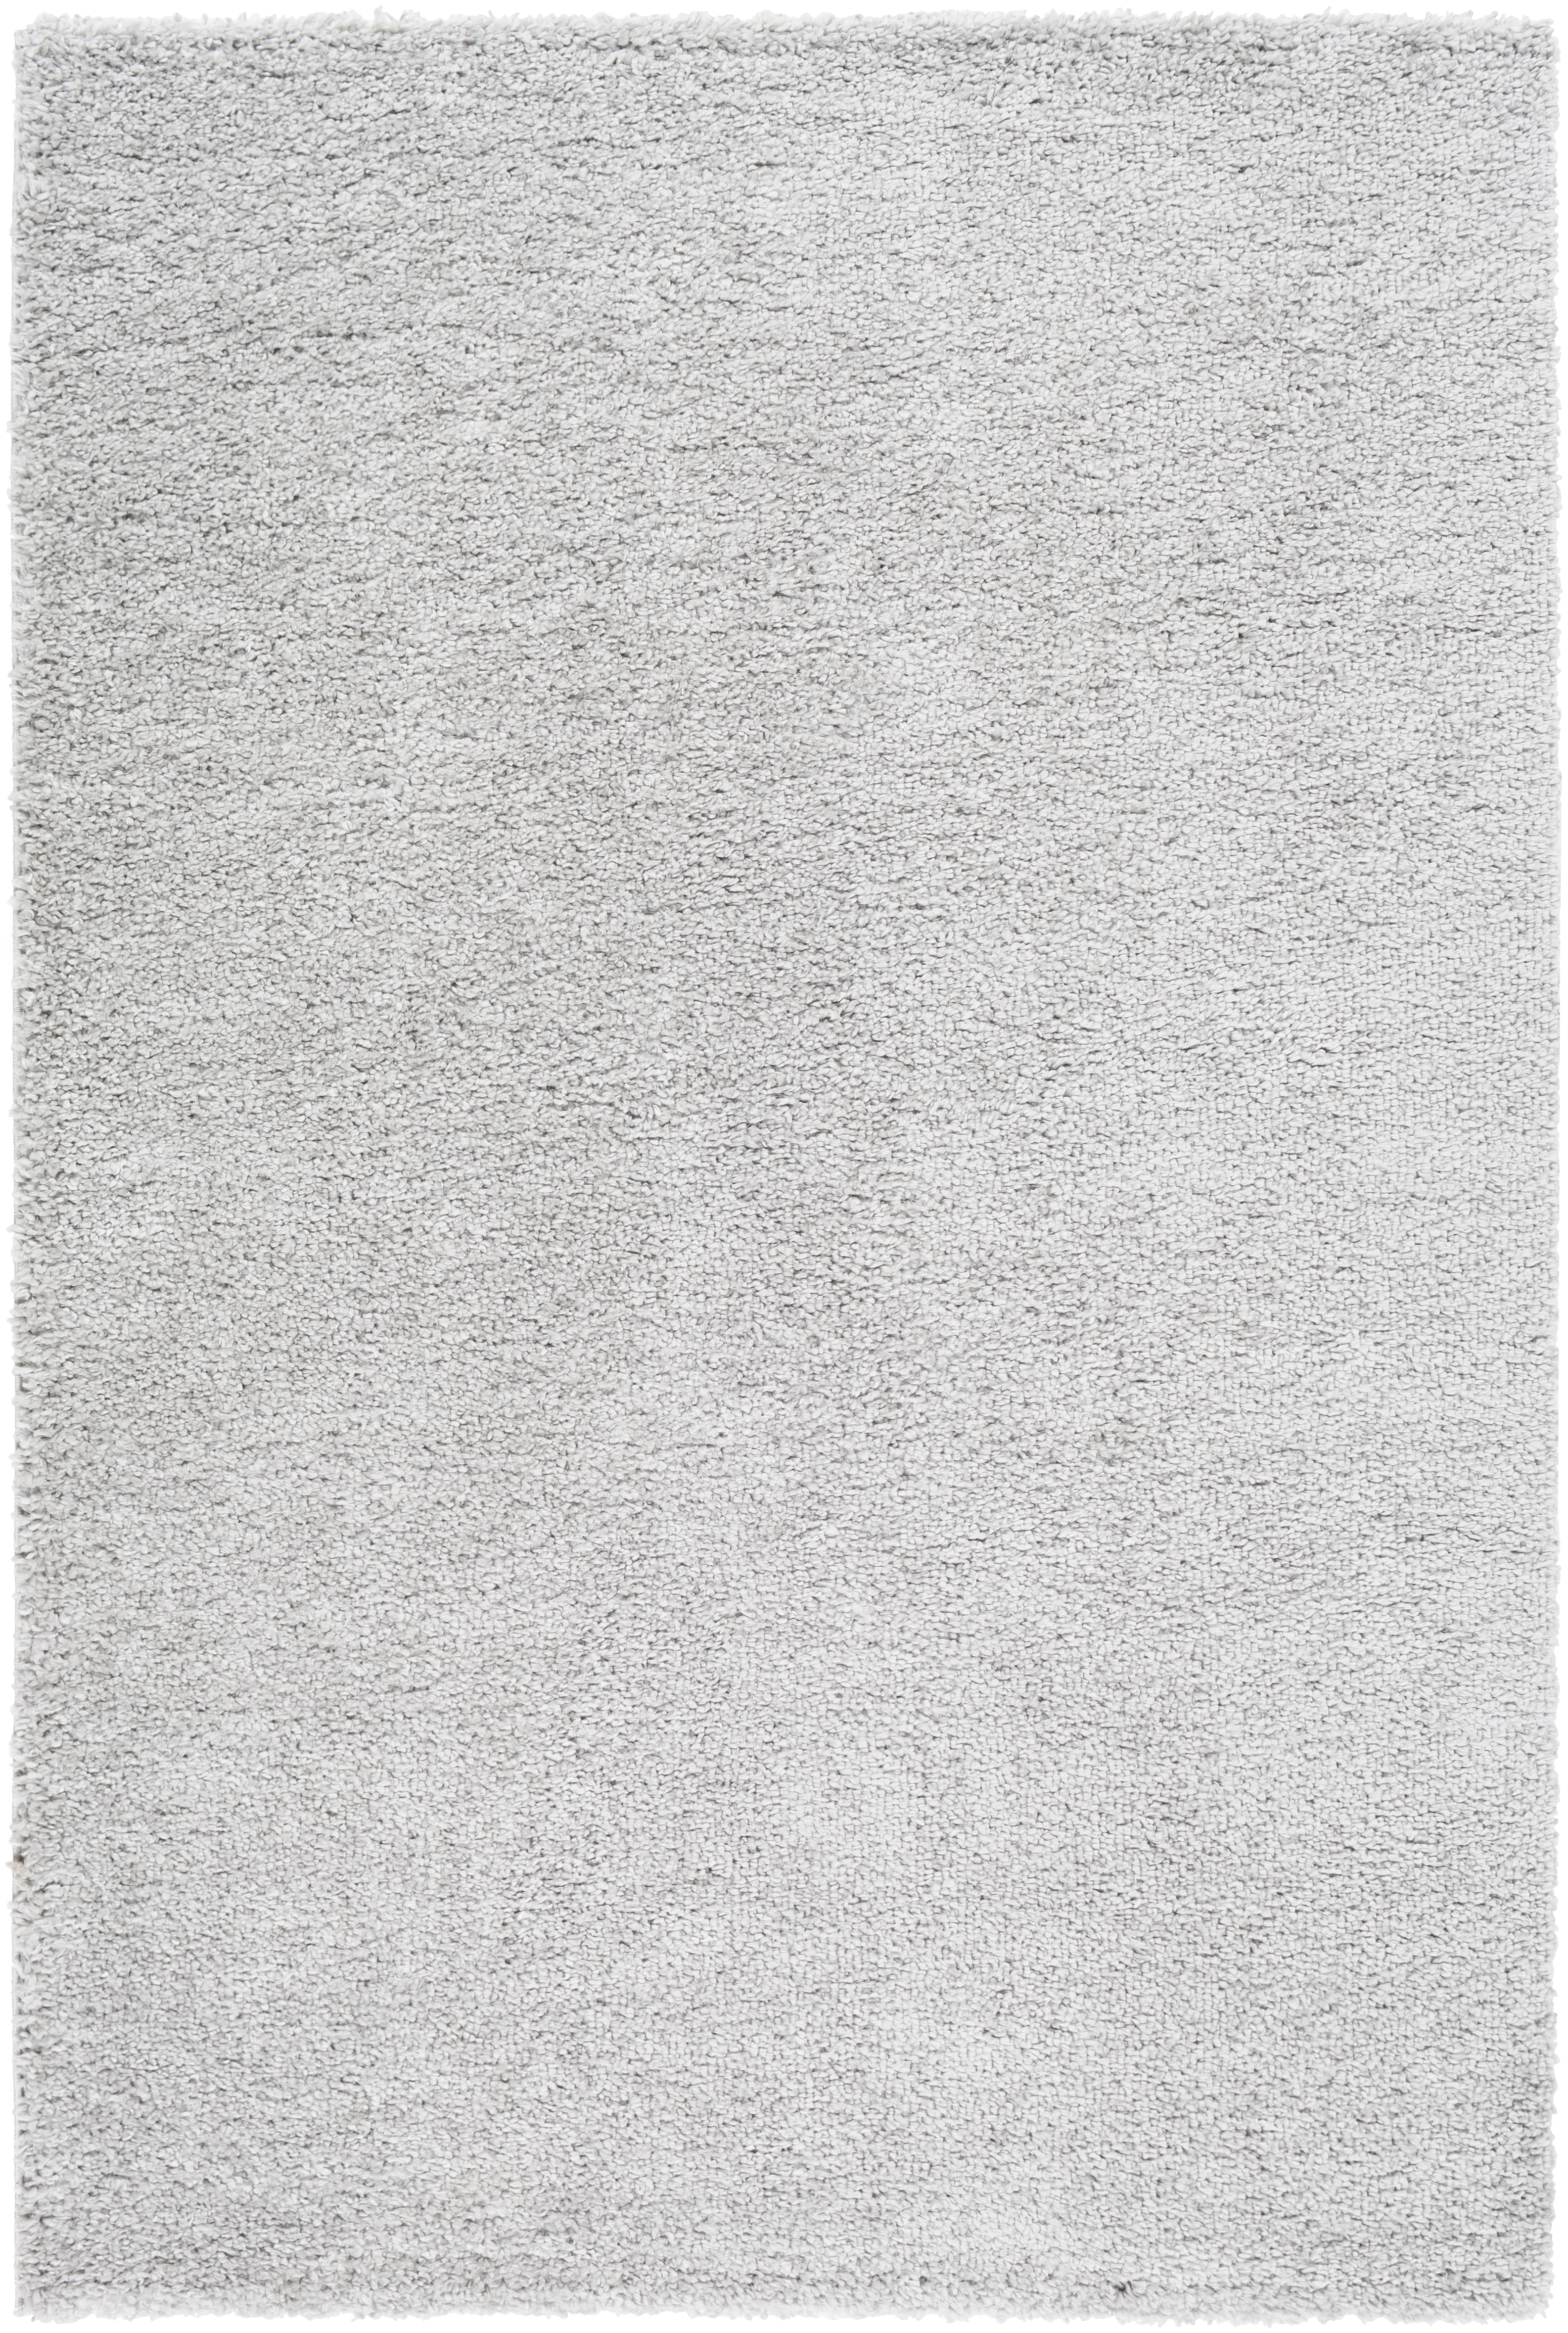 Deluxe Shag Rug, 9' x 12' - Image 0